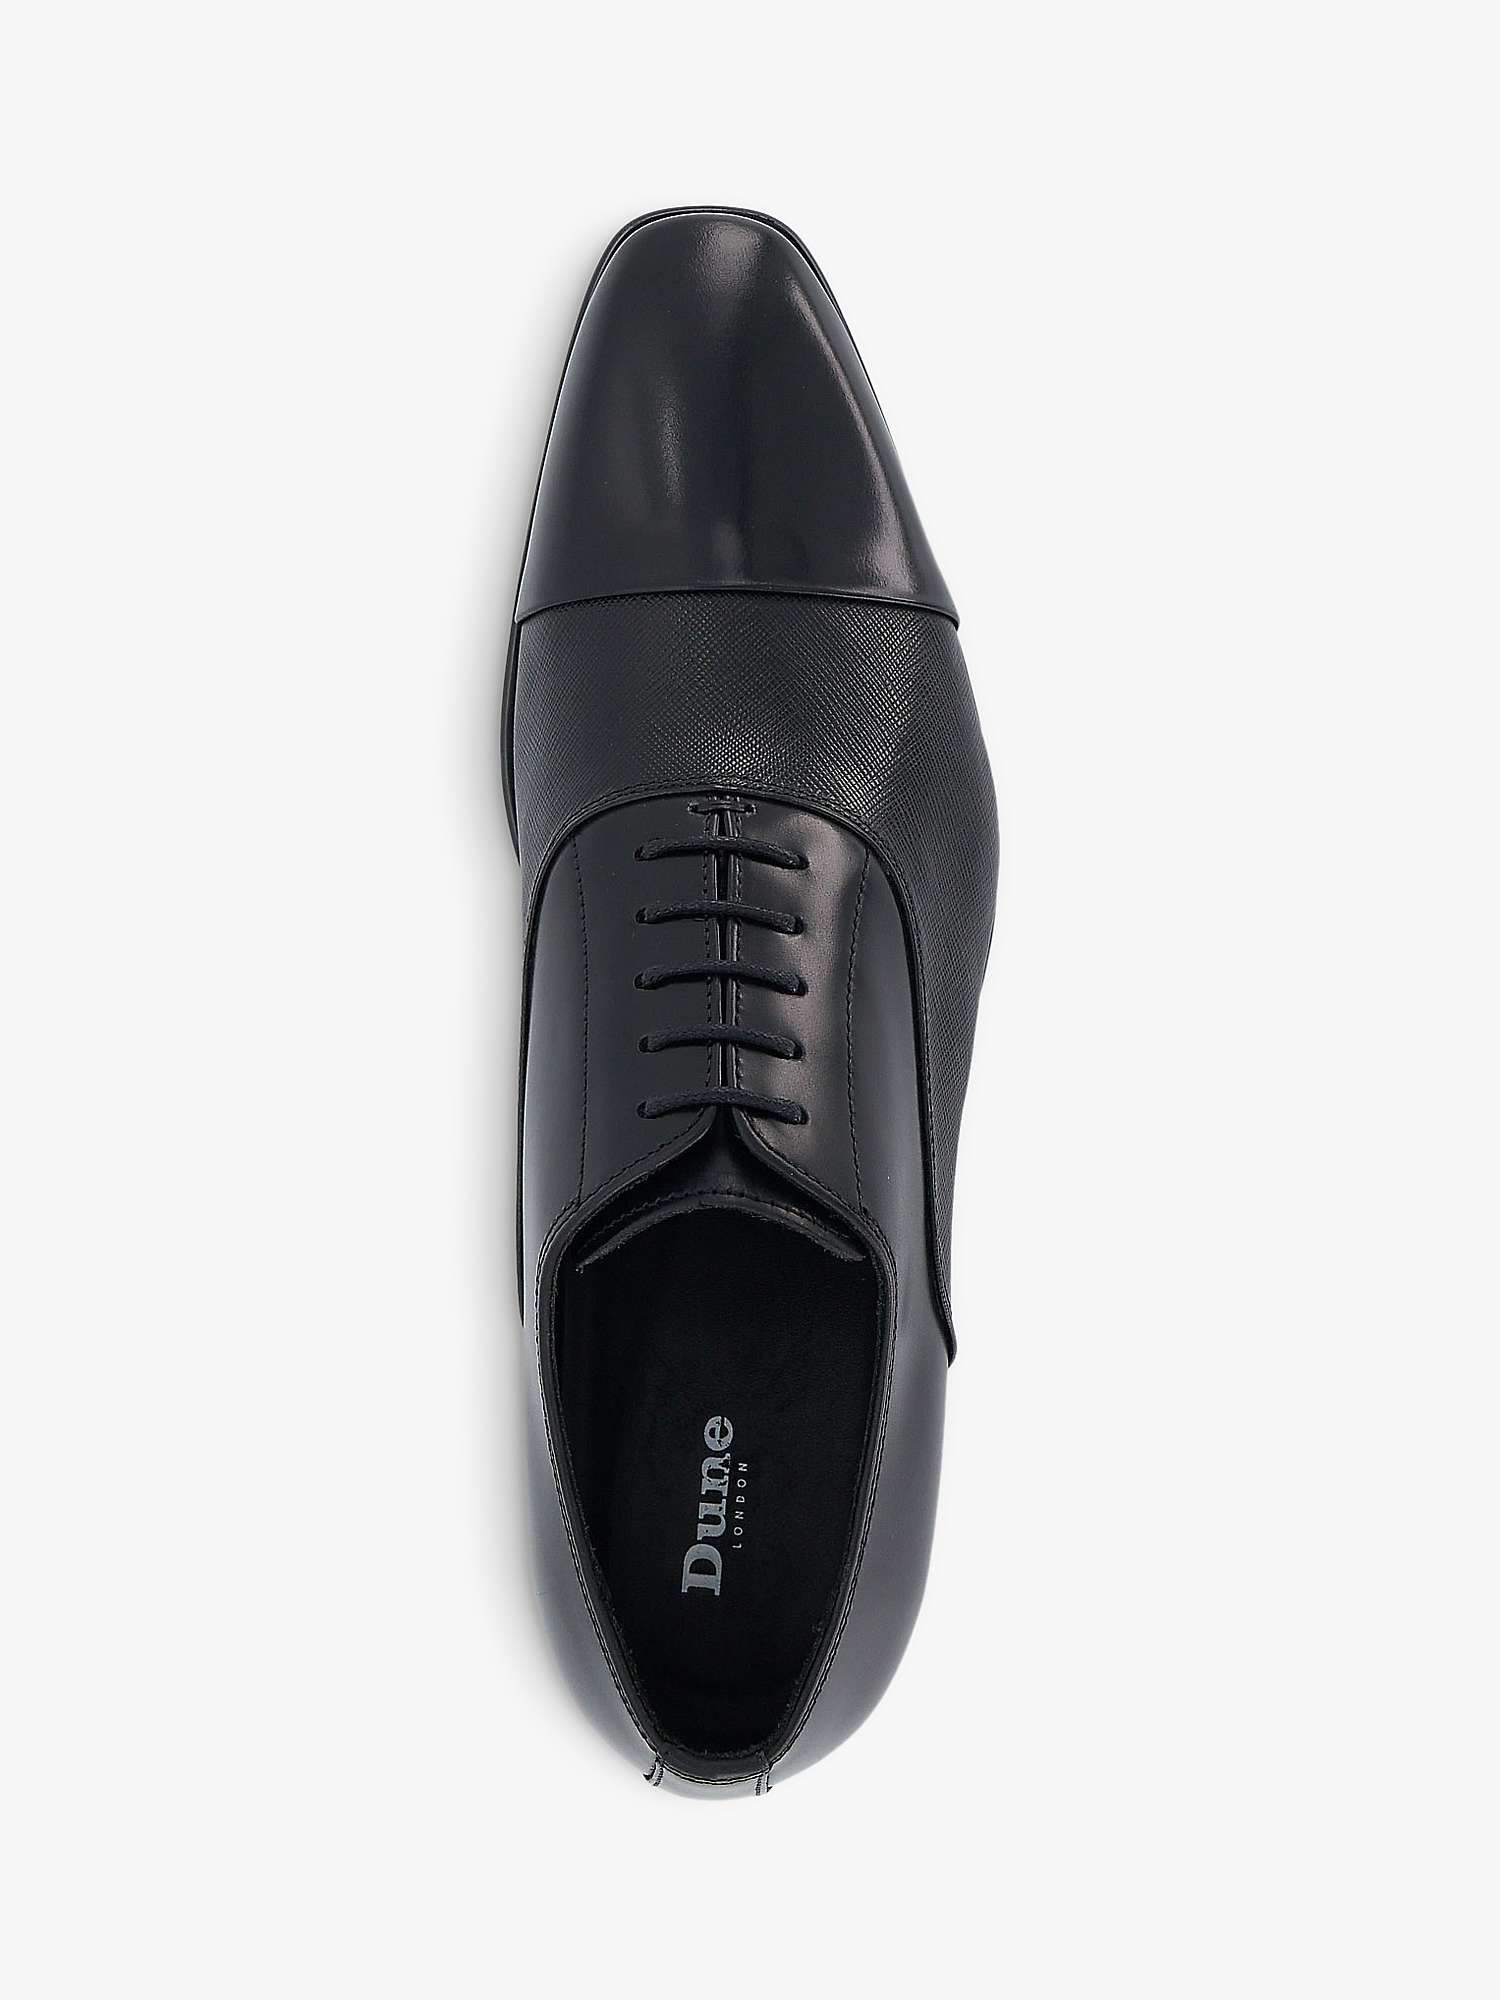 Dune Wide Fit Slating Leather Oxford Shoes, Black at John Lewis & Partners